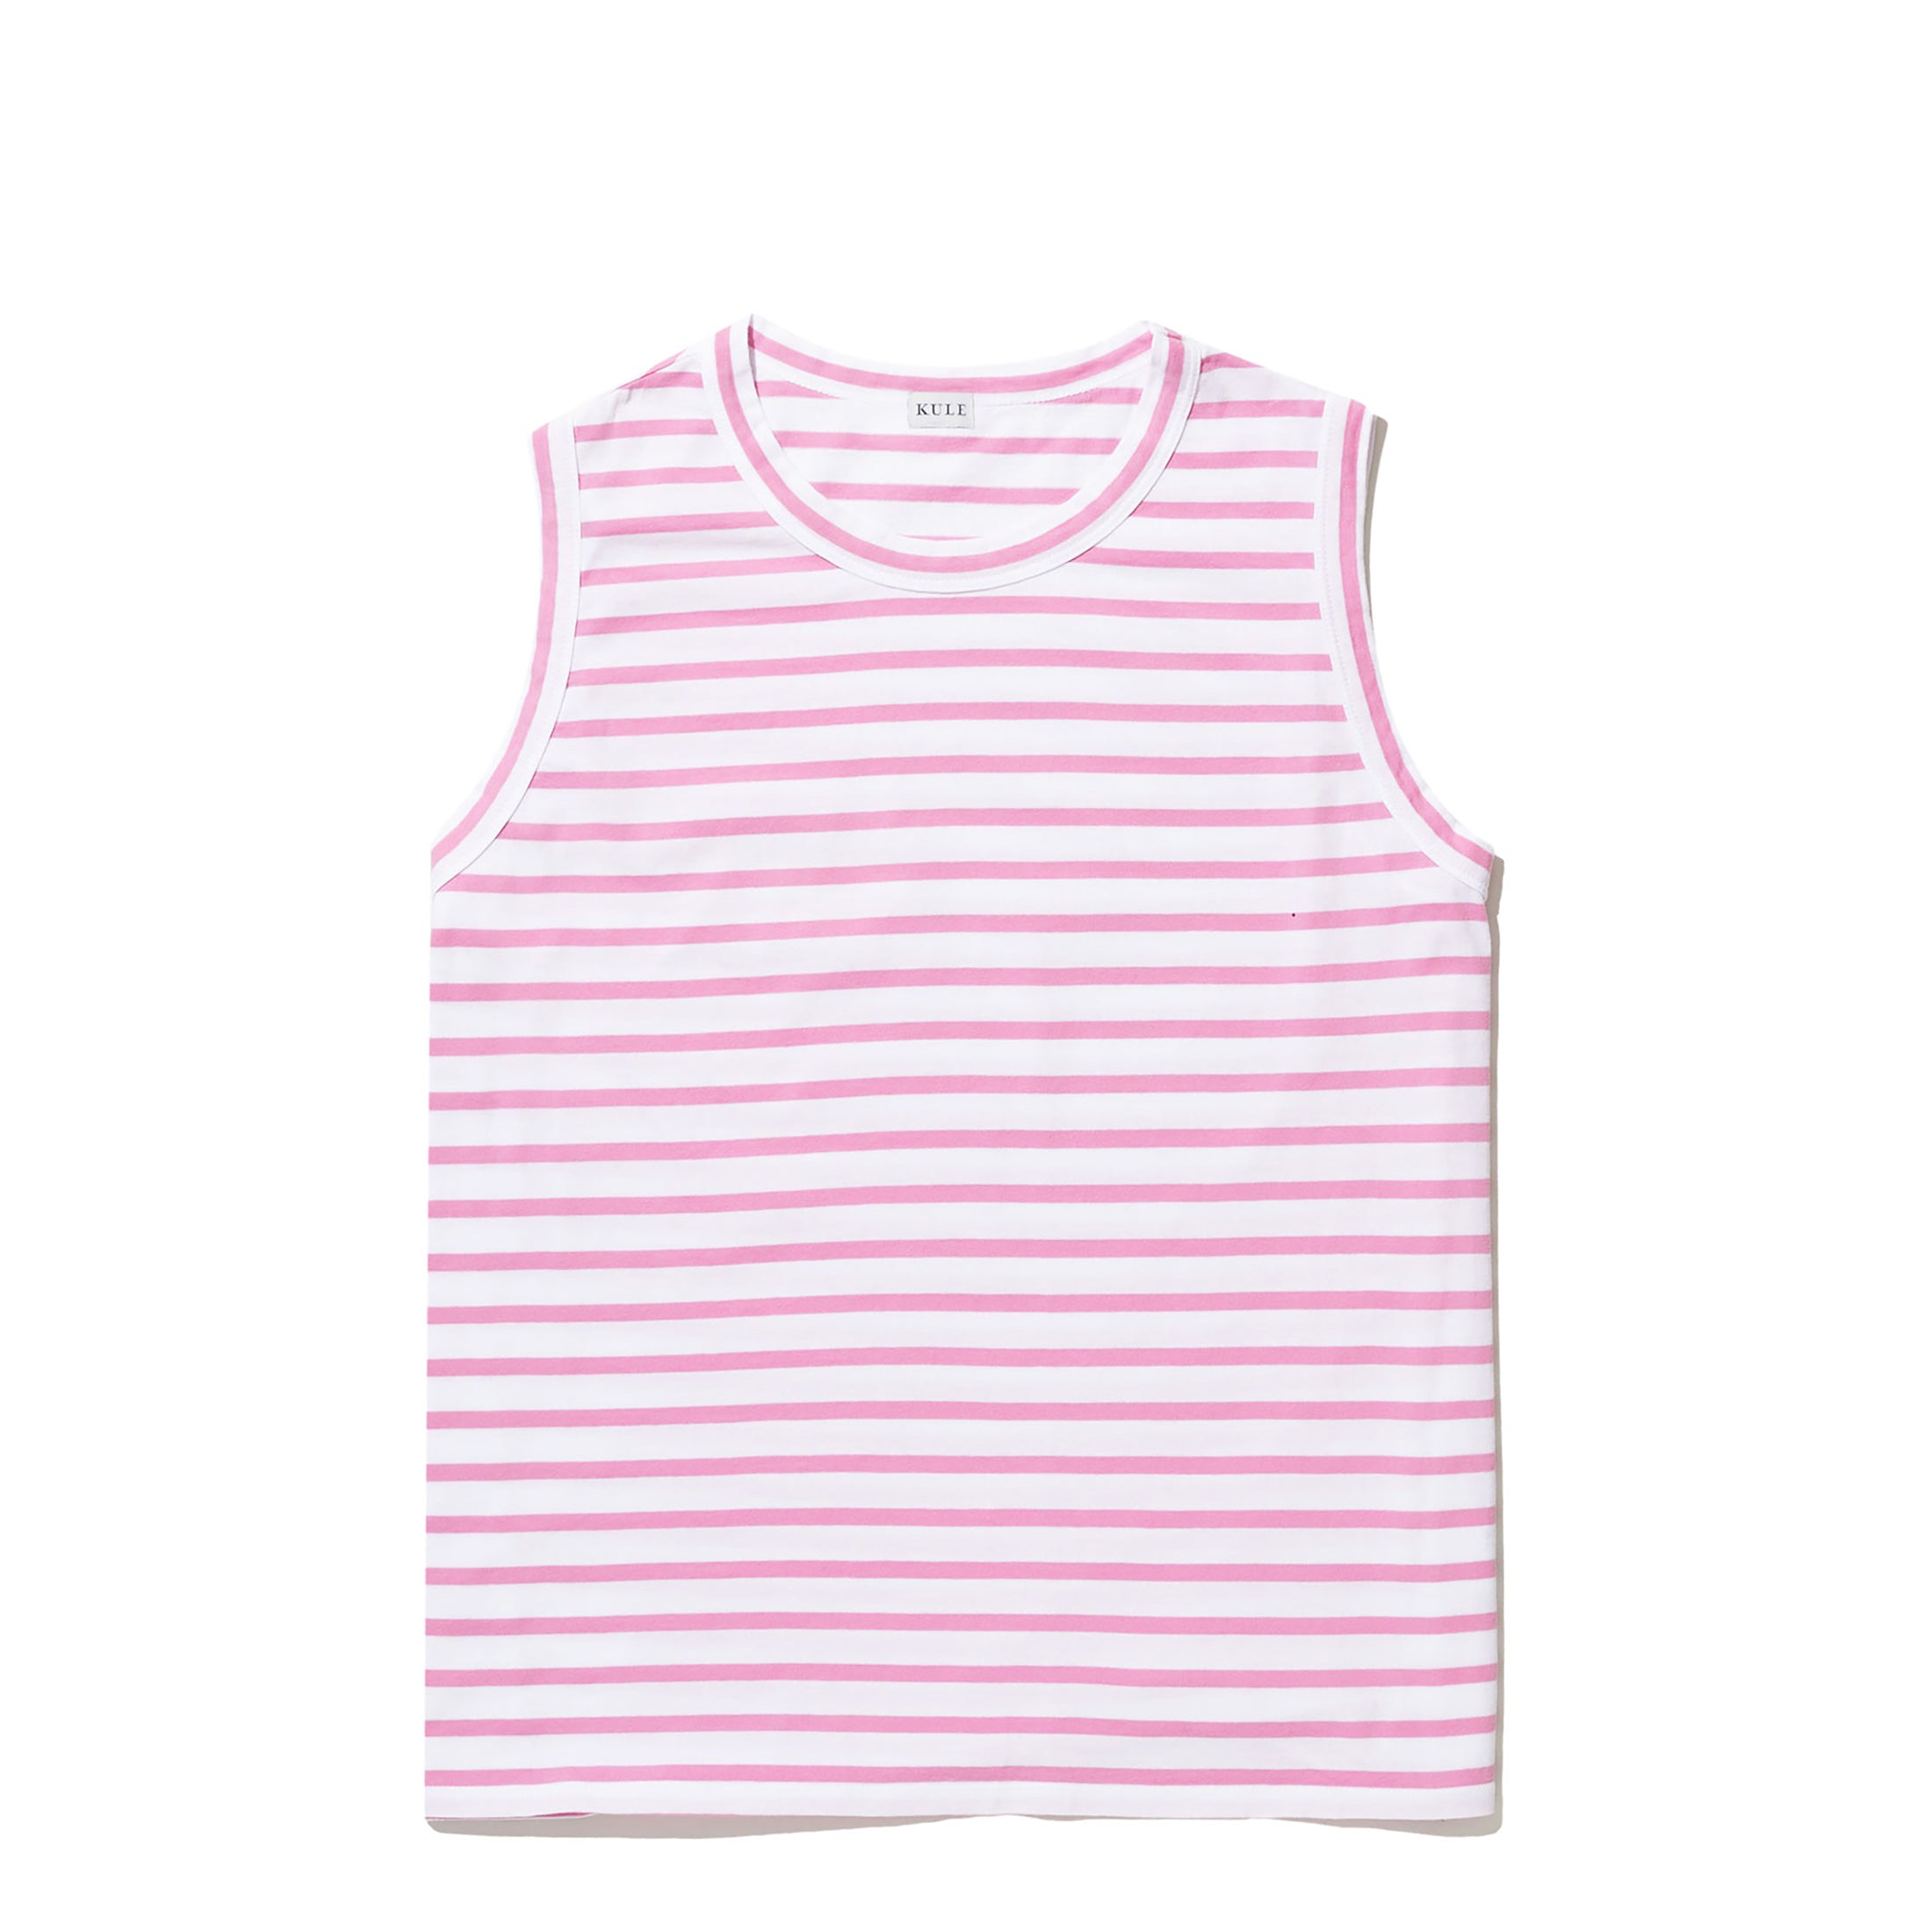 The Tank - White/Hot Pink